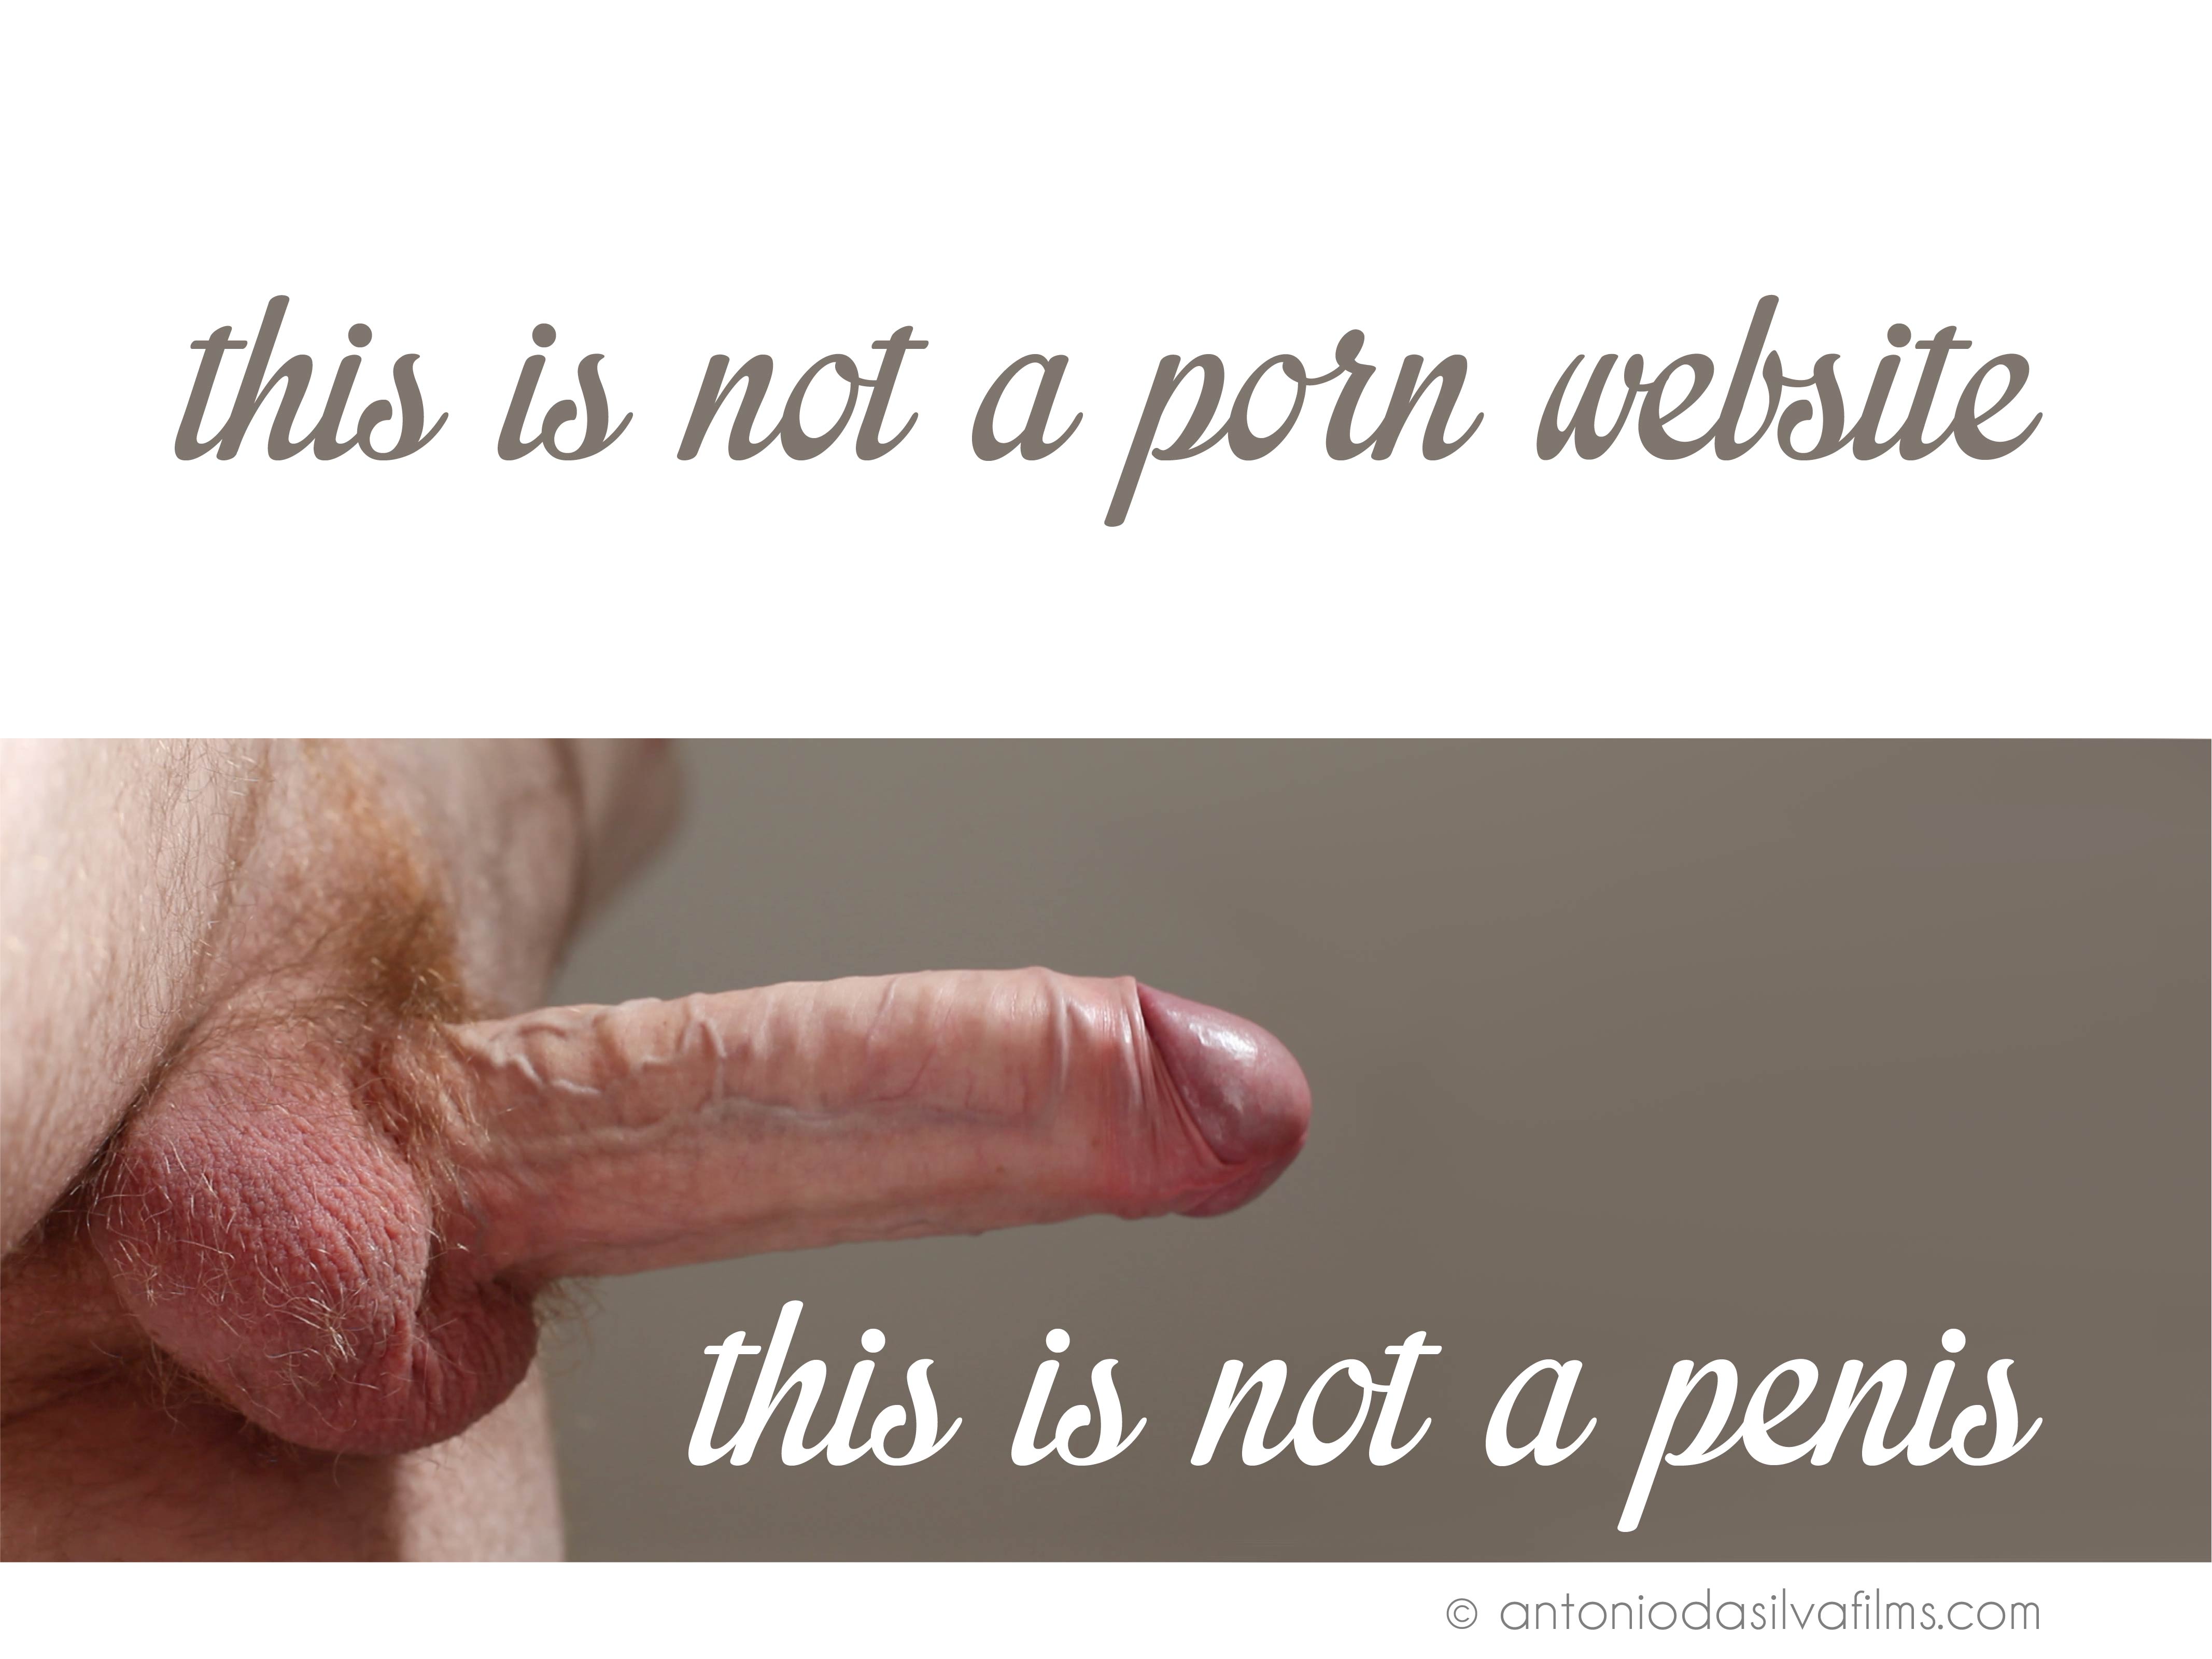 This is not a porn website : this is not a penis